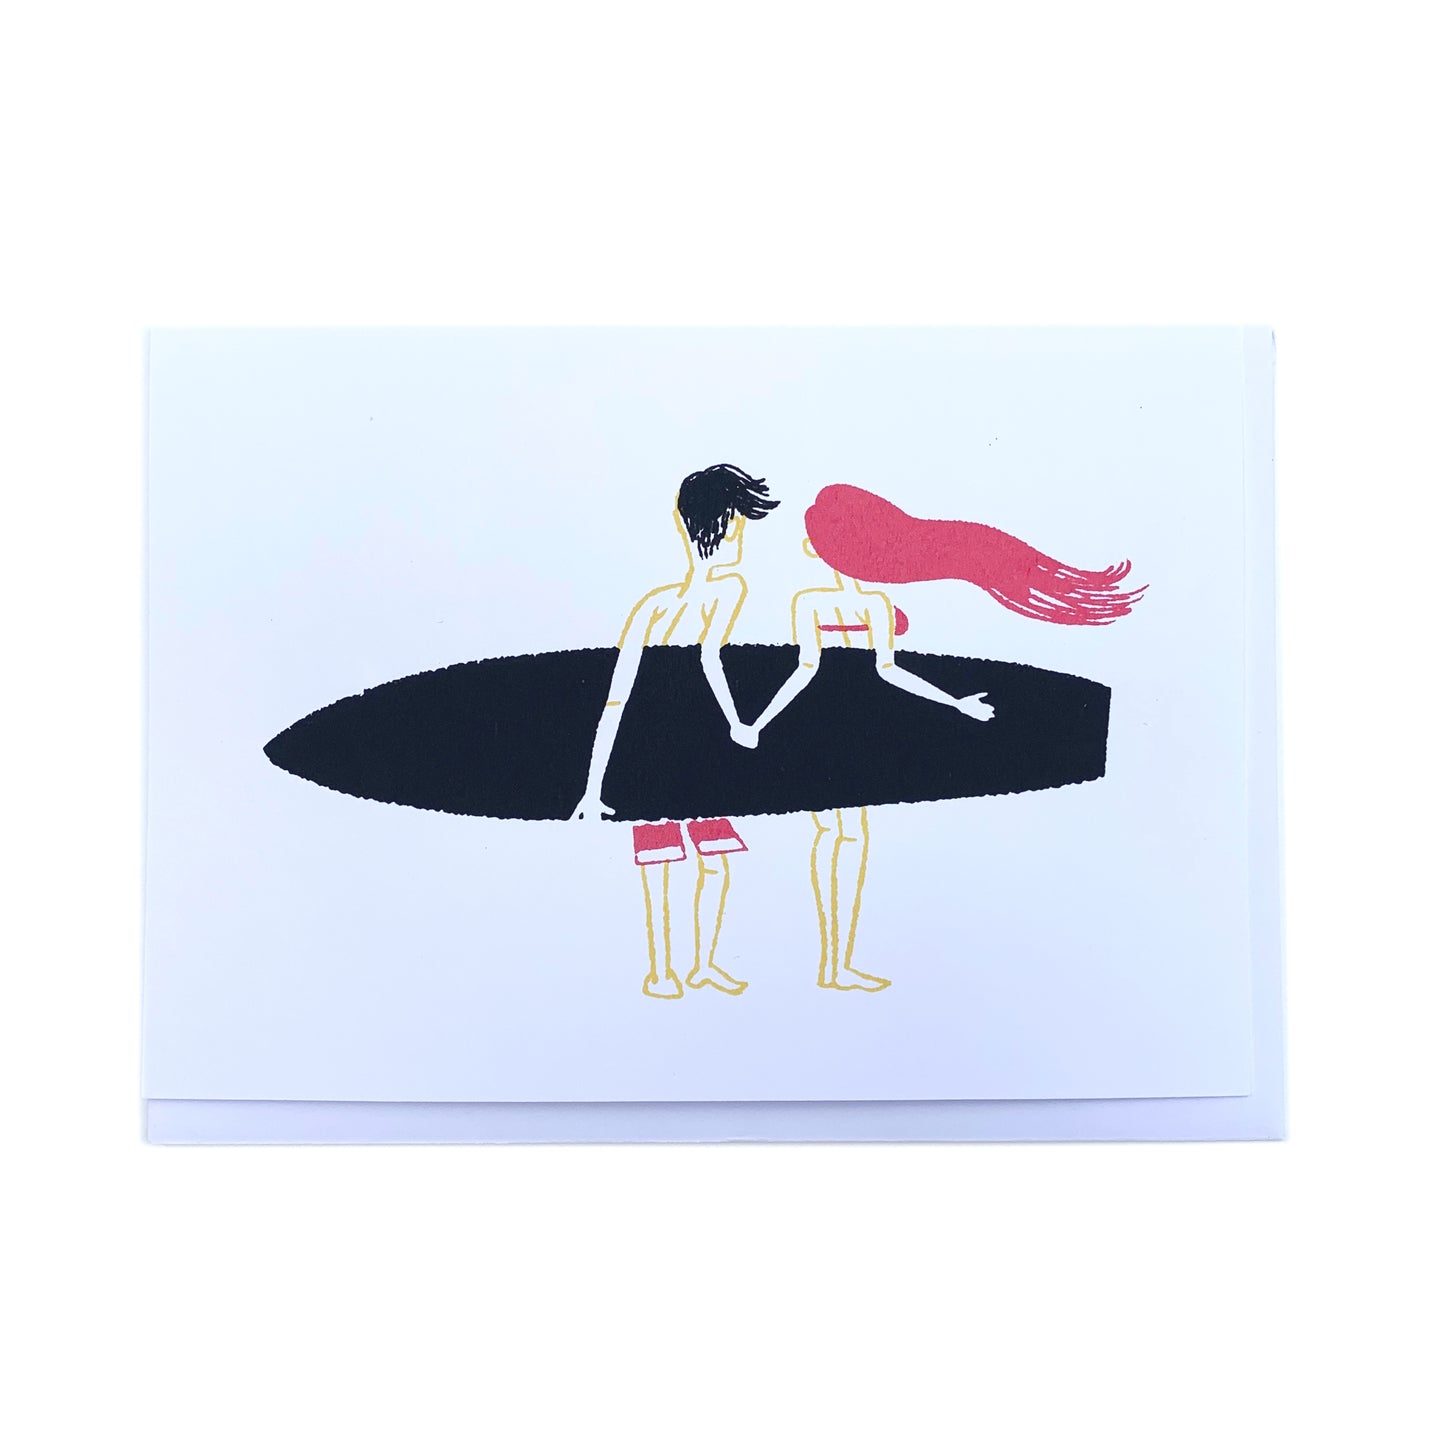 Made in Canada surfing themed love and friendship card, with silkscreen painting of two surfers holding one surfboard and holding hands. No caption.